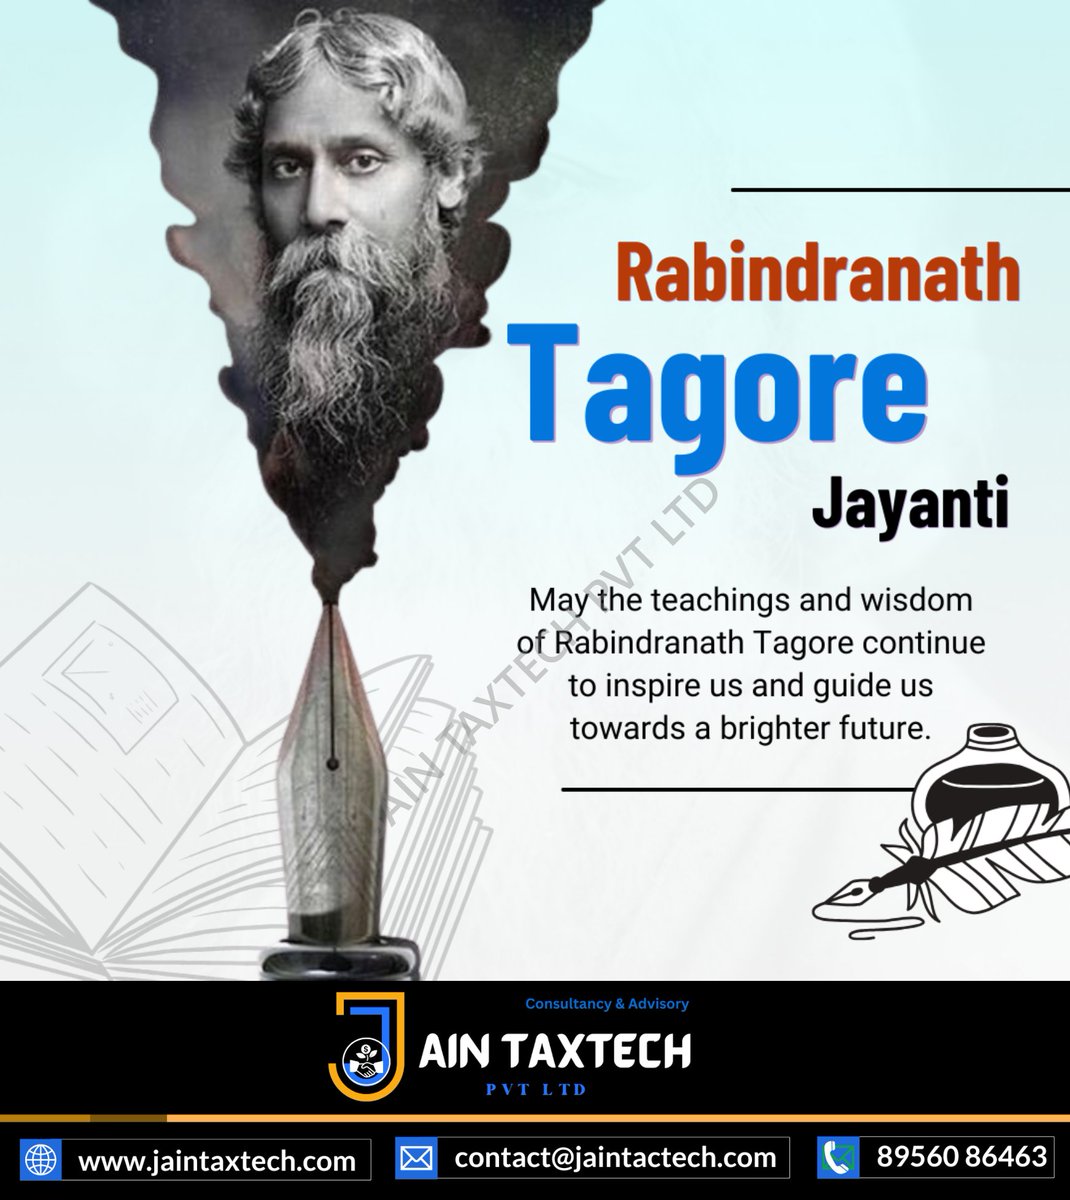 Remembering Rabindranath Tagore on His Birth Anniversary! 🌹🎂 Celebrating the Life, Legacy, and Literary Genius of the Great Poet and Philosopher. Jain TaxTech Pays Tribute to Tagore's Enduring Inspirations! 📜✨ #TagoreJayanti #LiteraryLegacy #JainTaxTech #BengaliCulture